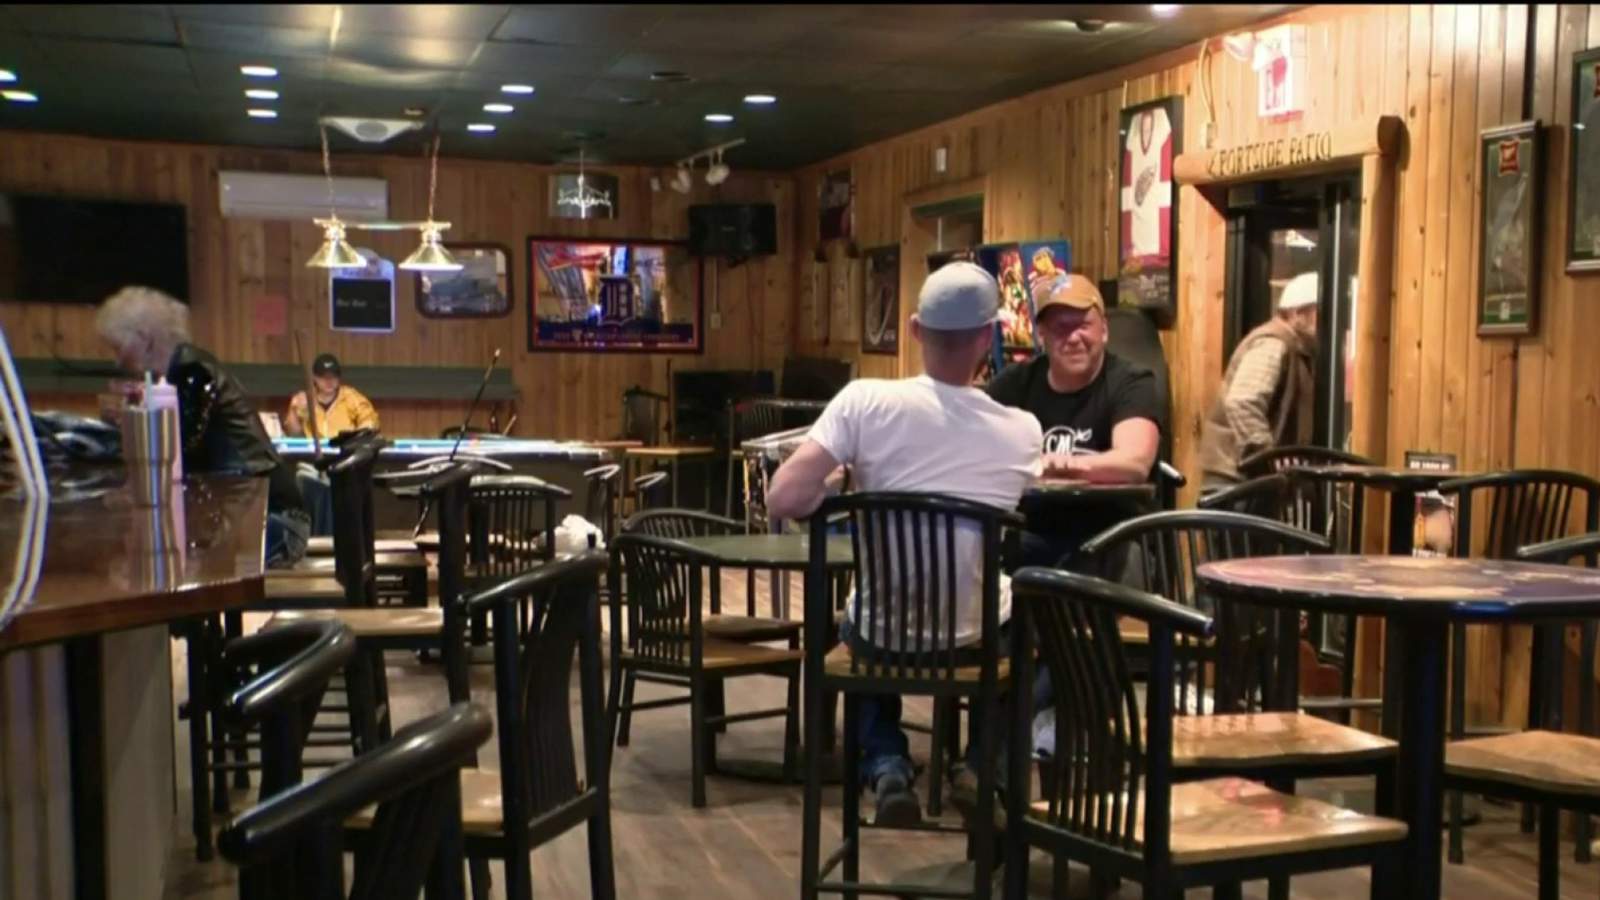 VIDEO: Traverse City bars reopen at midnight as loosened restrictions begin